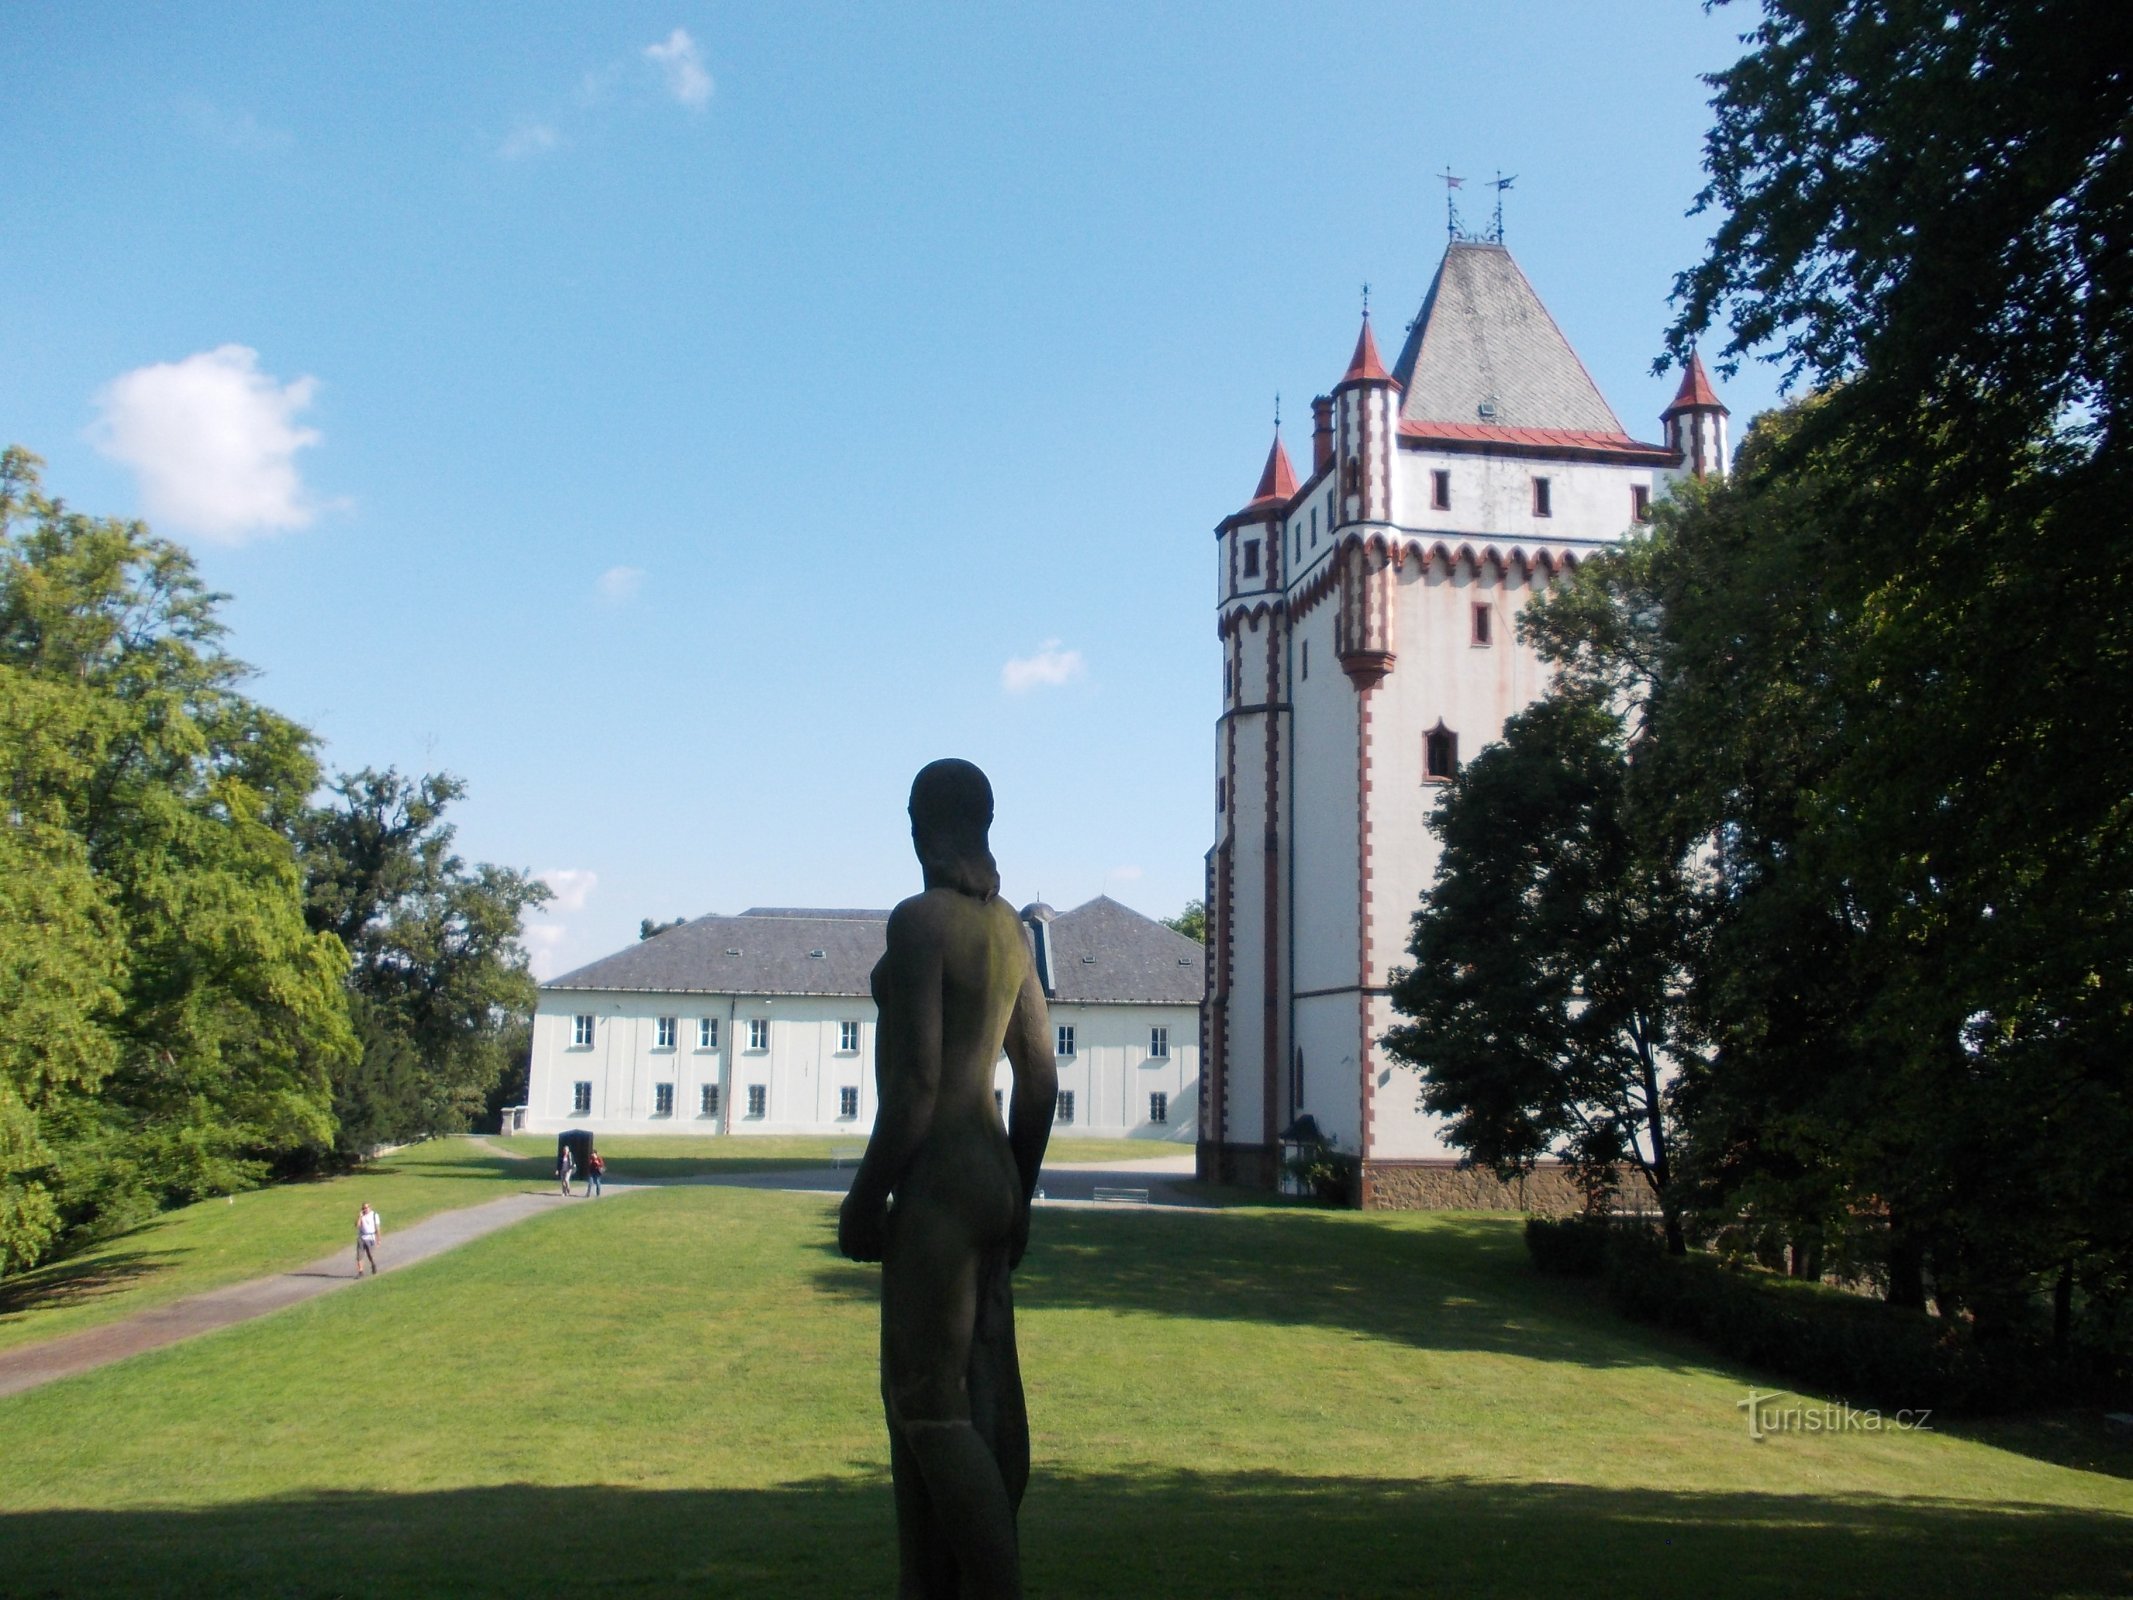 view of the castle and tower